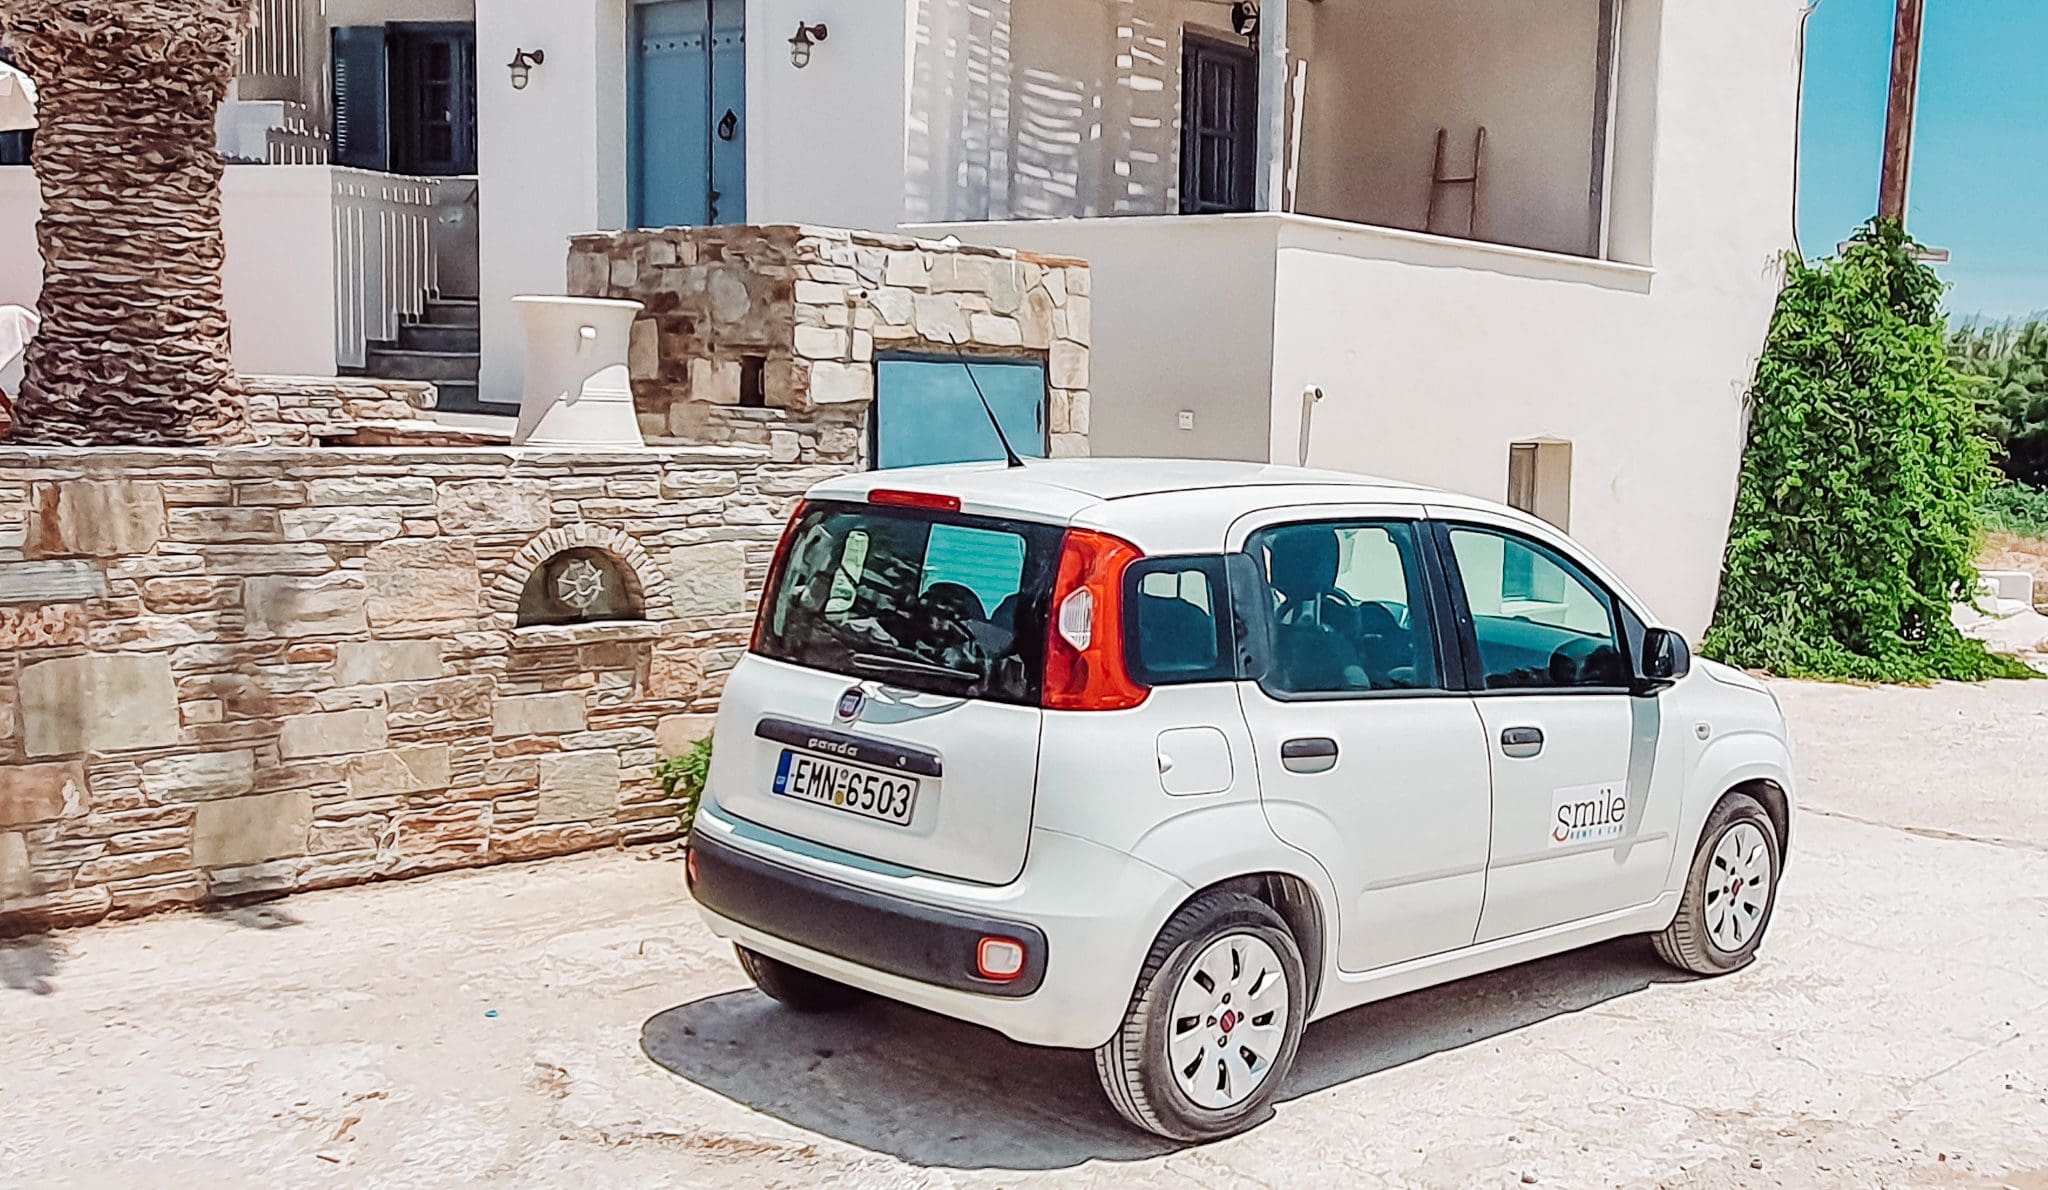 Our hire car in Naxos